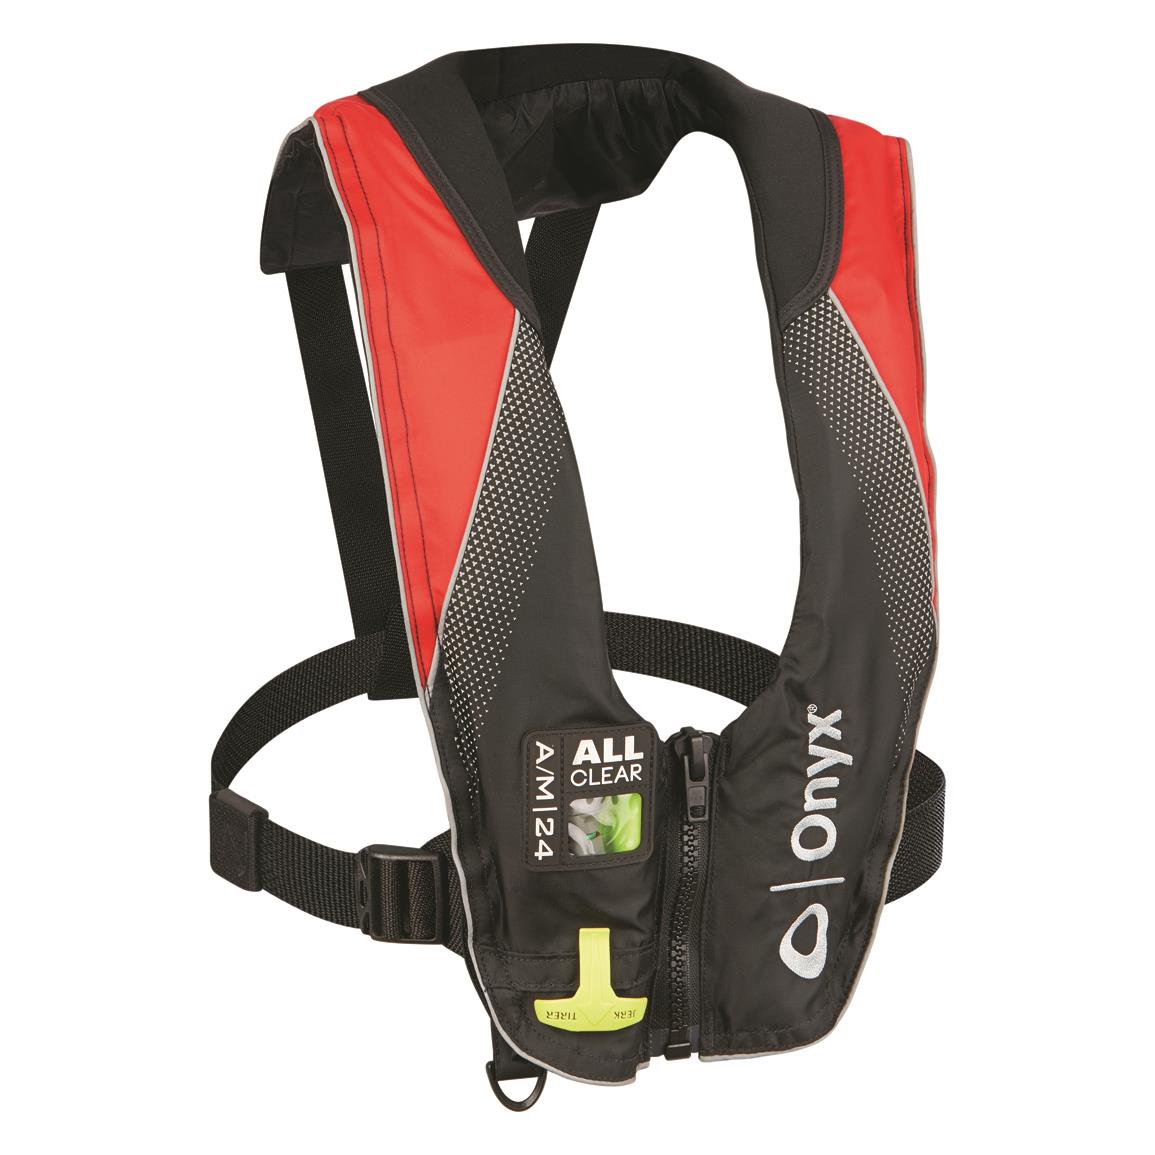 Onyx Impulse A/M-24 All Clear Automatic Inflatable Life Jacket